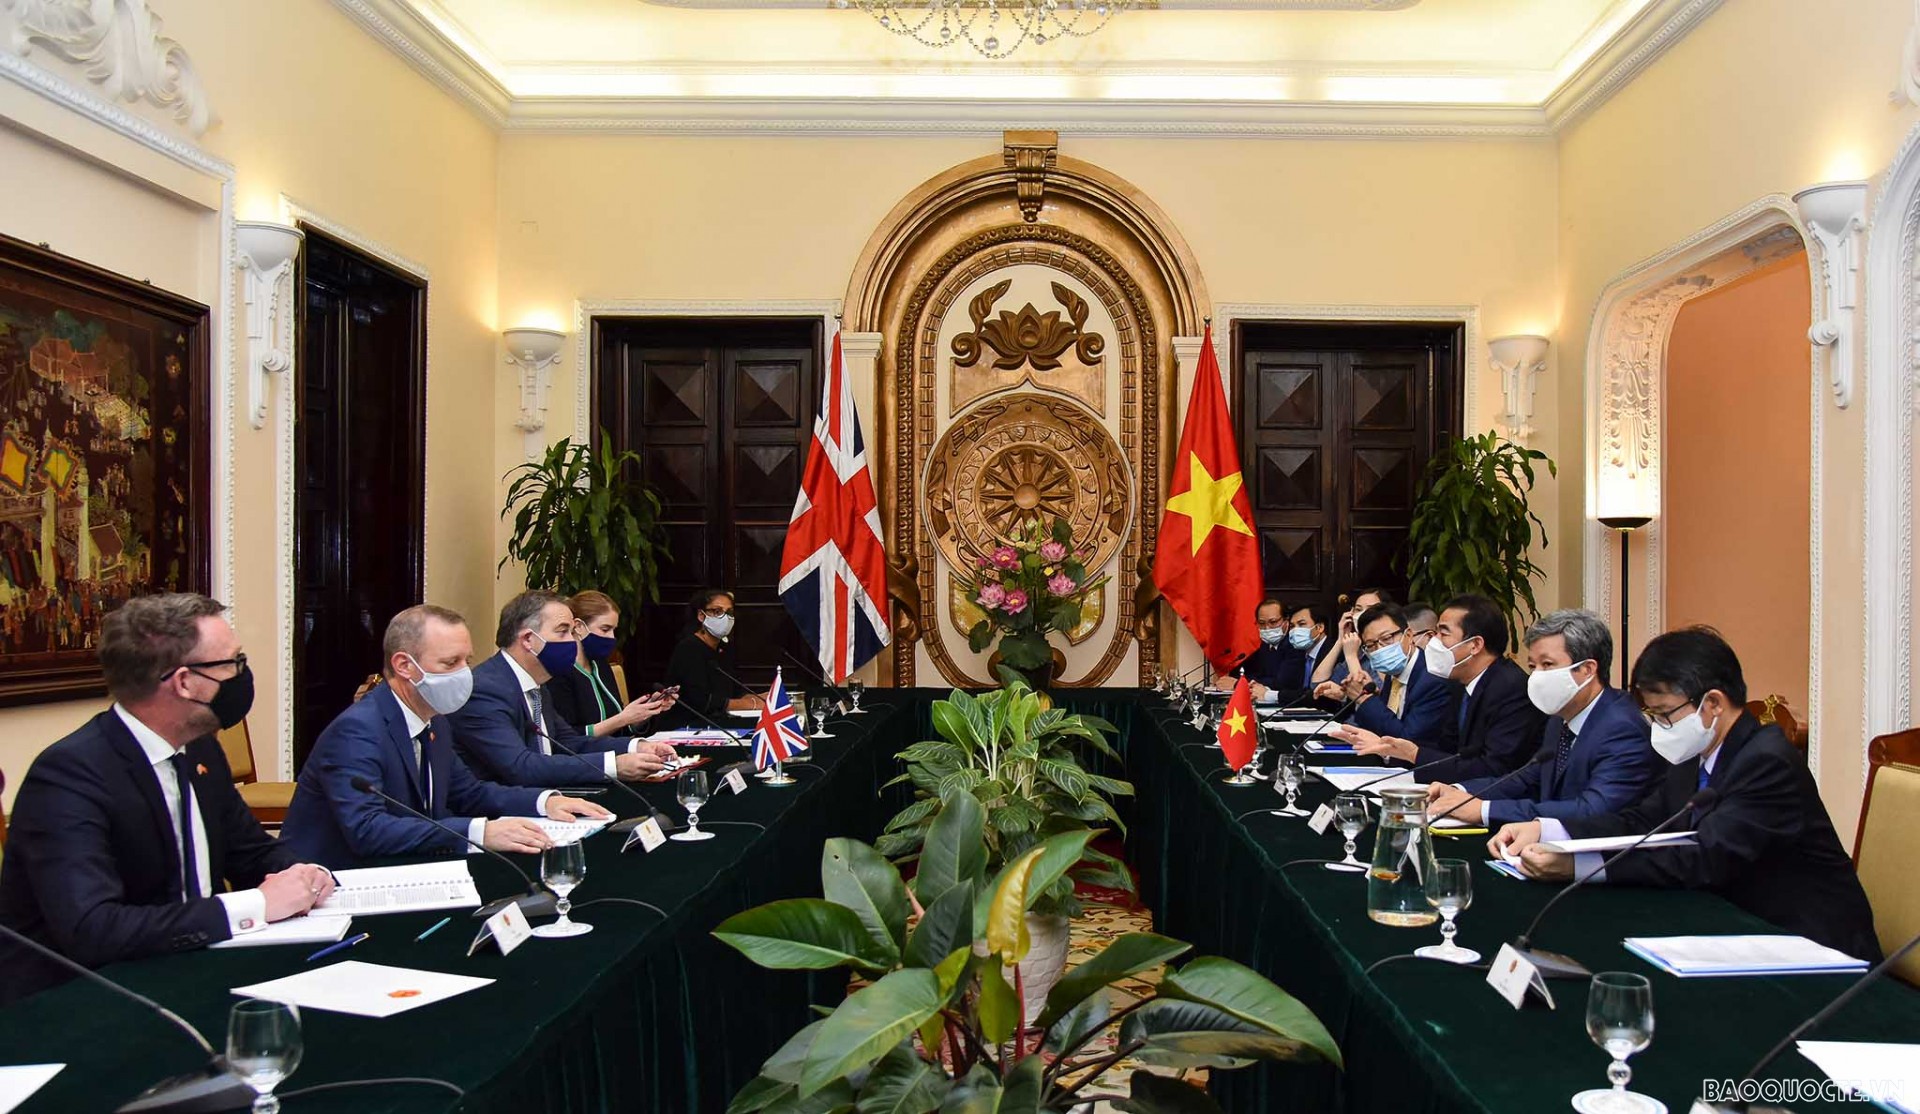 Viet Nam – UK’s leading partner in Asia-Pacific: British Minister of State for Asia